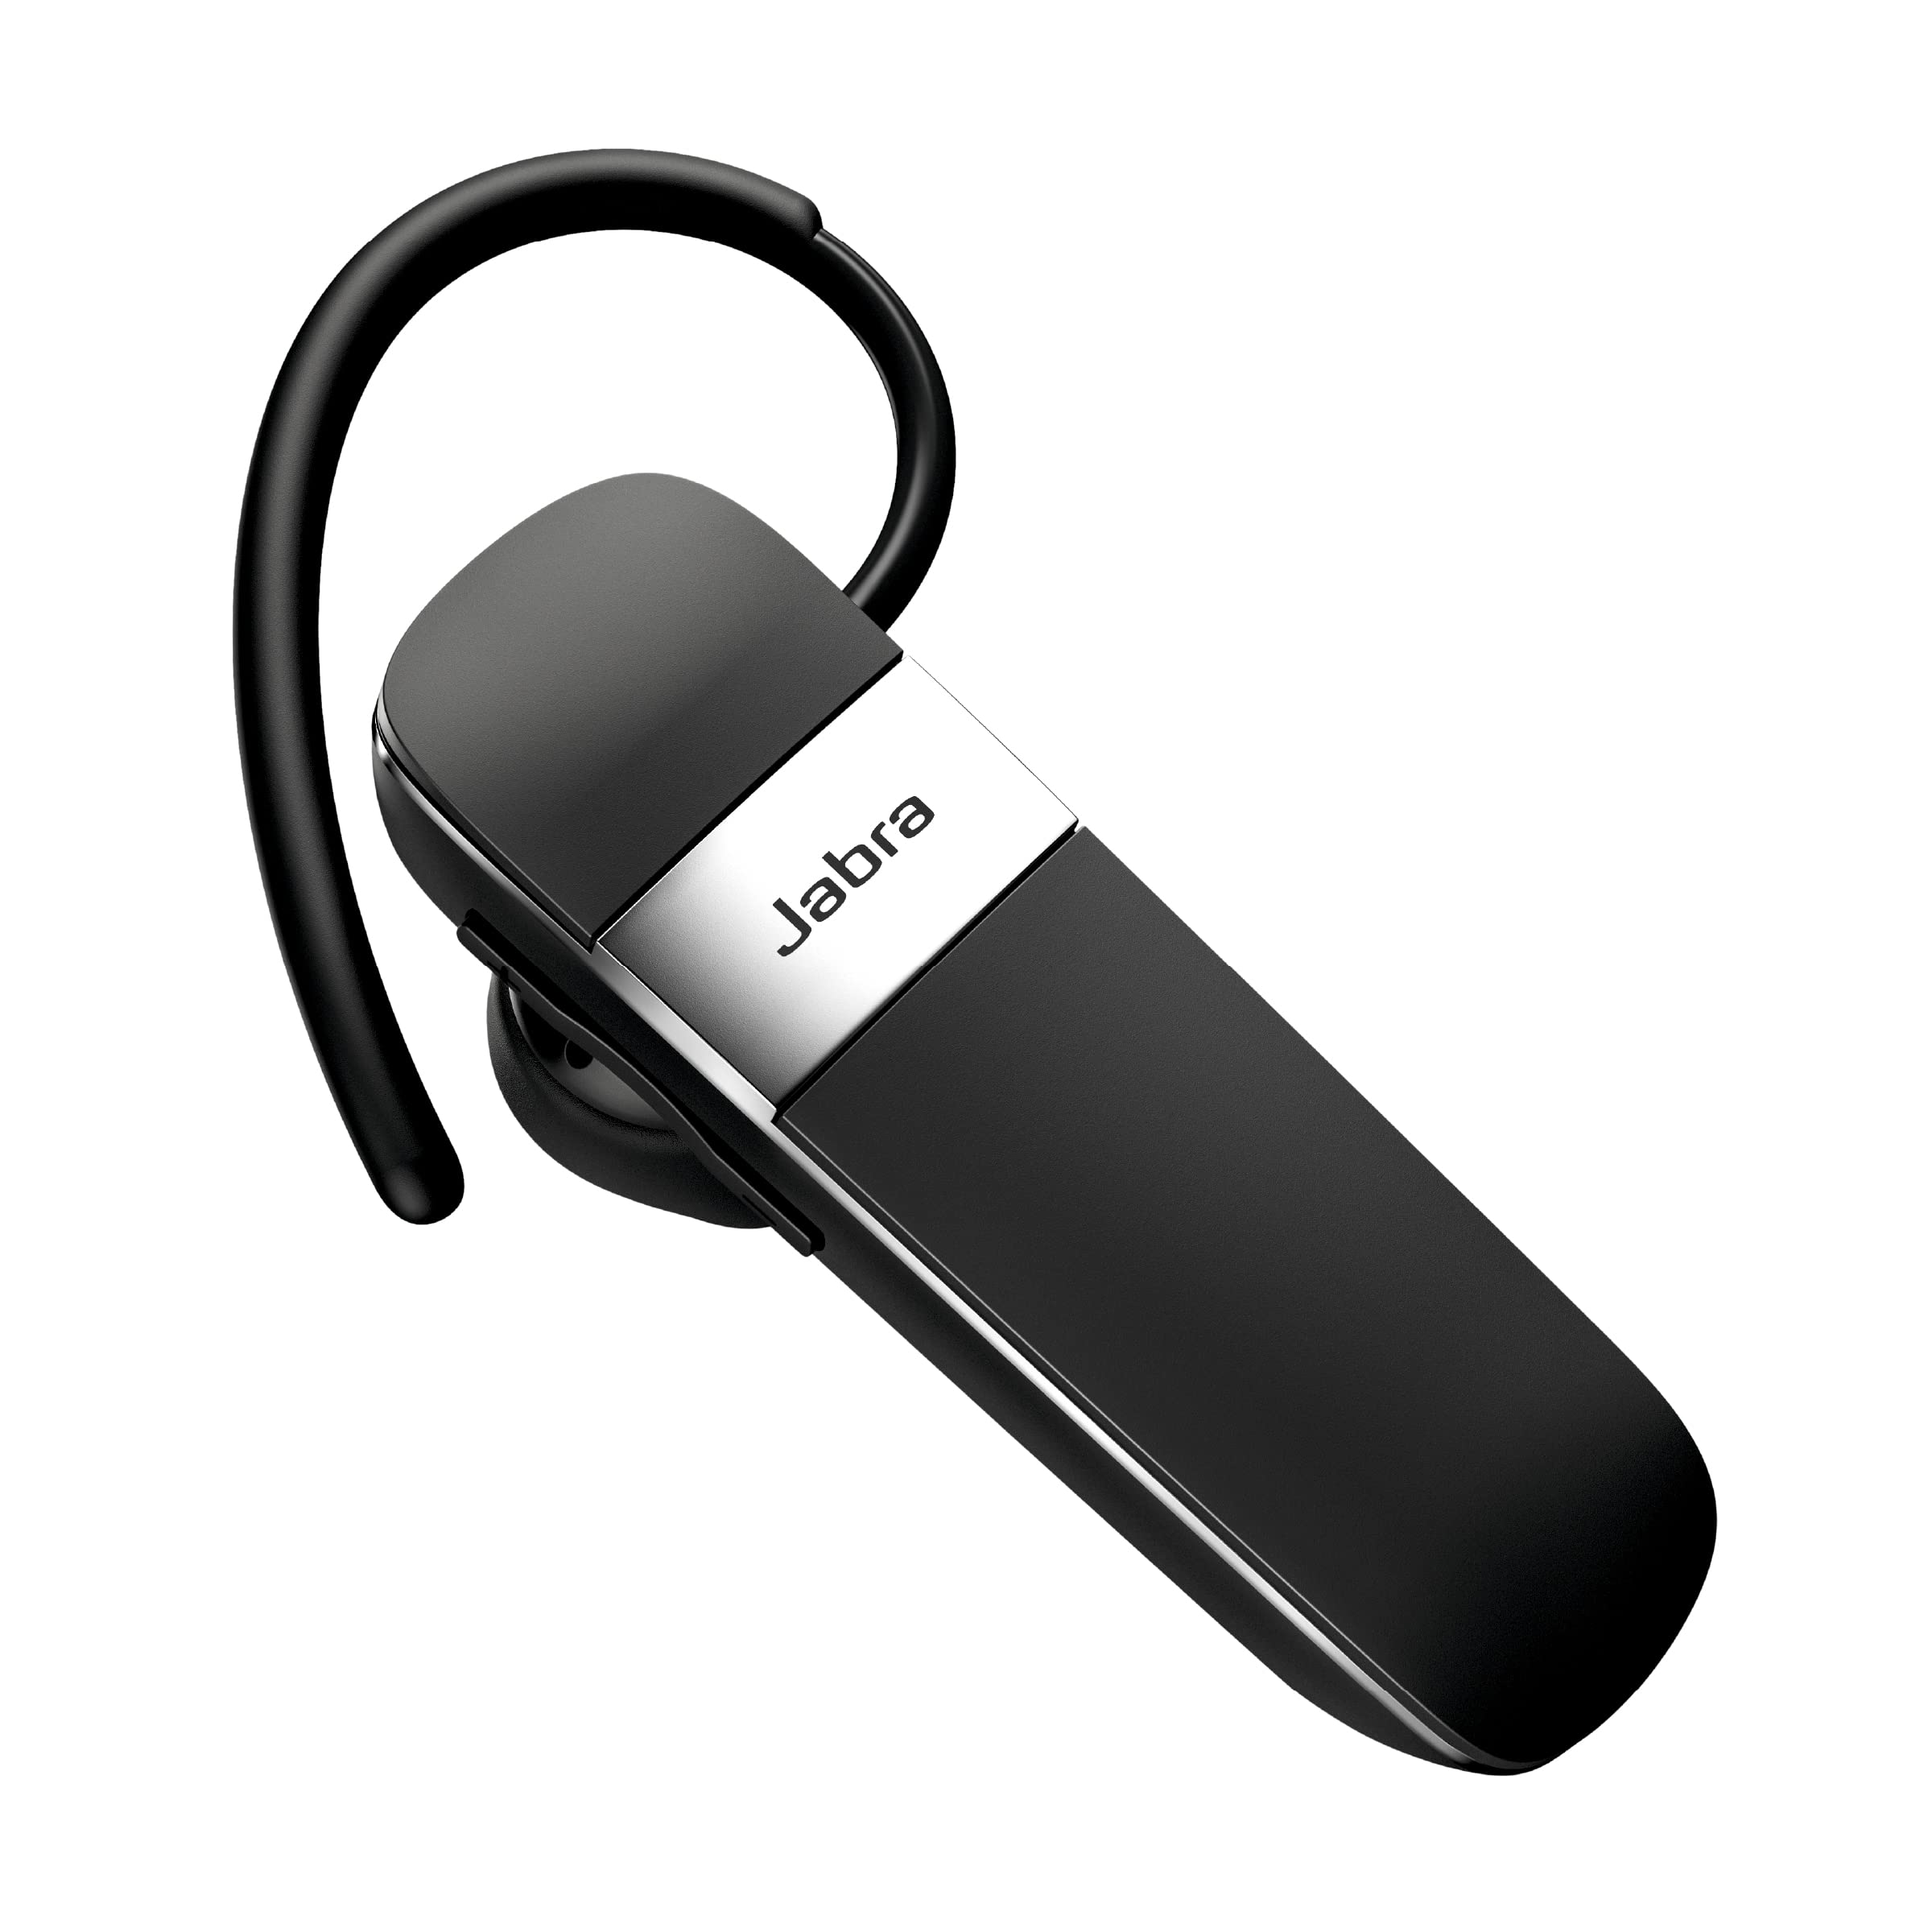 Jabra Talk 15 SE Mono Bluetooth Headset – Wireless Single Ear Headset with Built-in Microphone, up to 7 Hours Talk Time, Media Streaming, Black